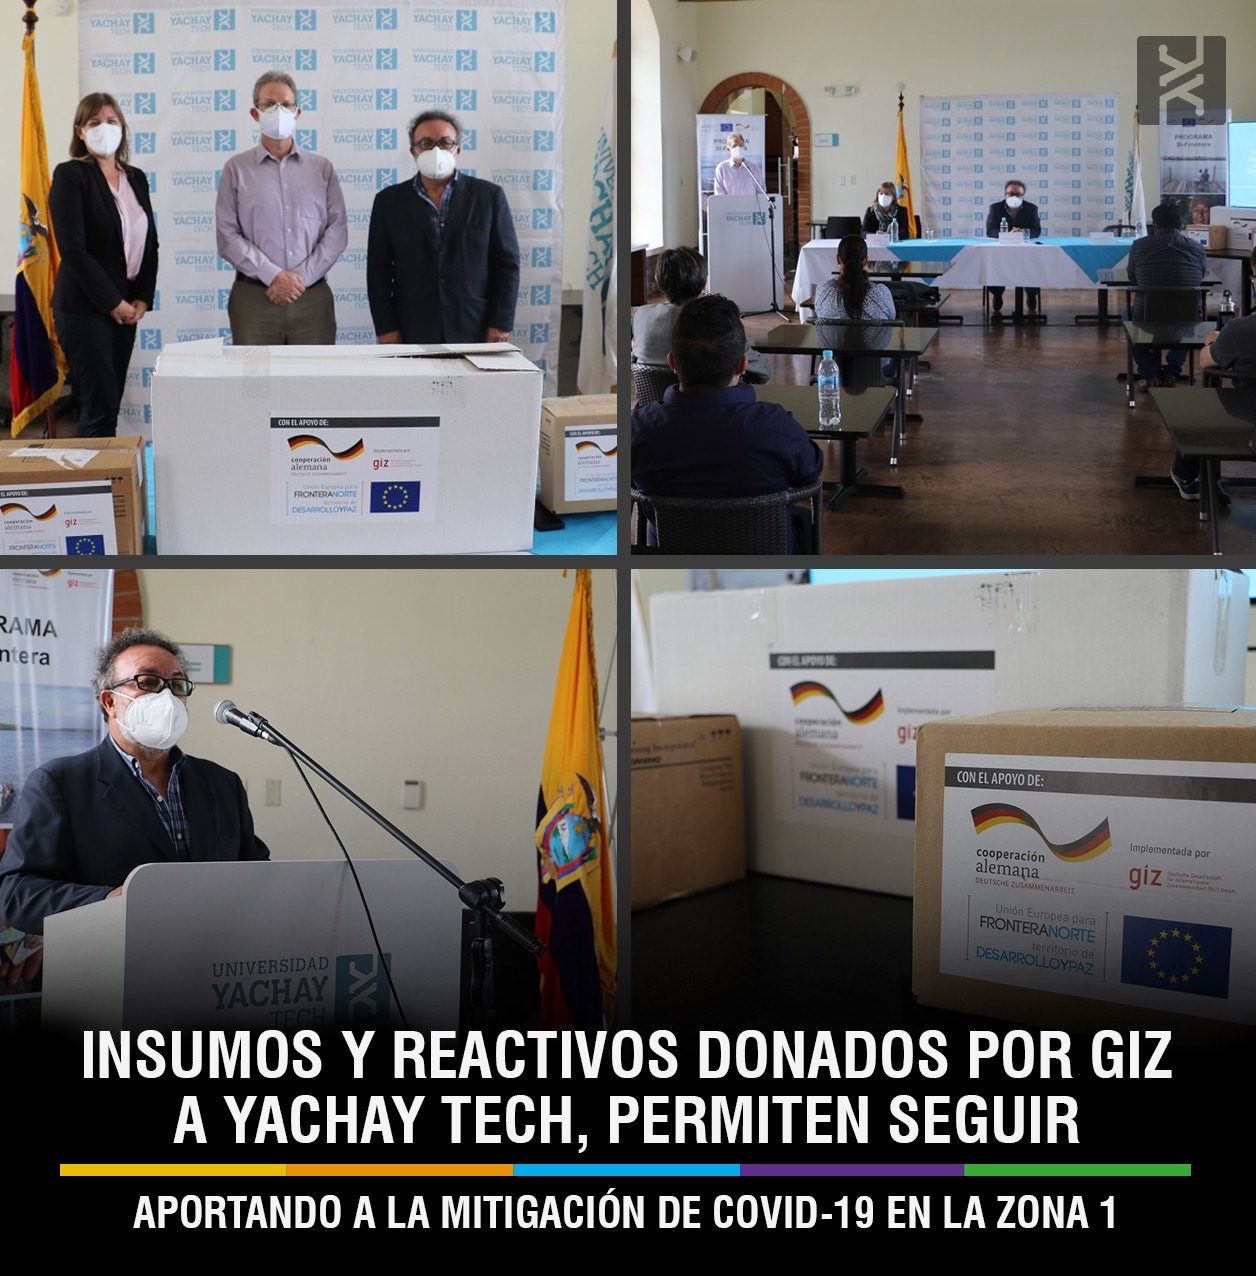 SUPPLIES AND REAGENTS DONATED BY GIZ ECUADOR TO YACHAY UNIVERSITY ALLOW IT TO CONTINUE CONTRIBUTING TO THE MITIGATION OF COVID-19 IN ZONE 1